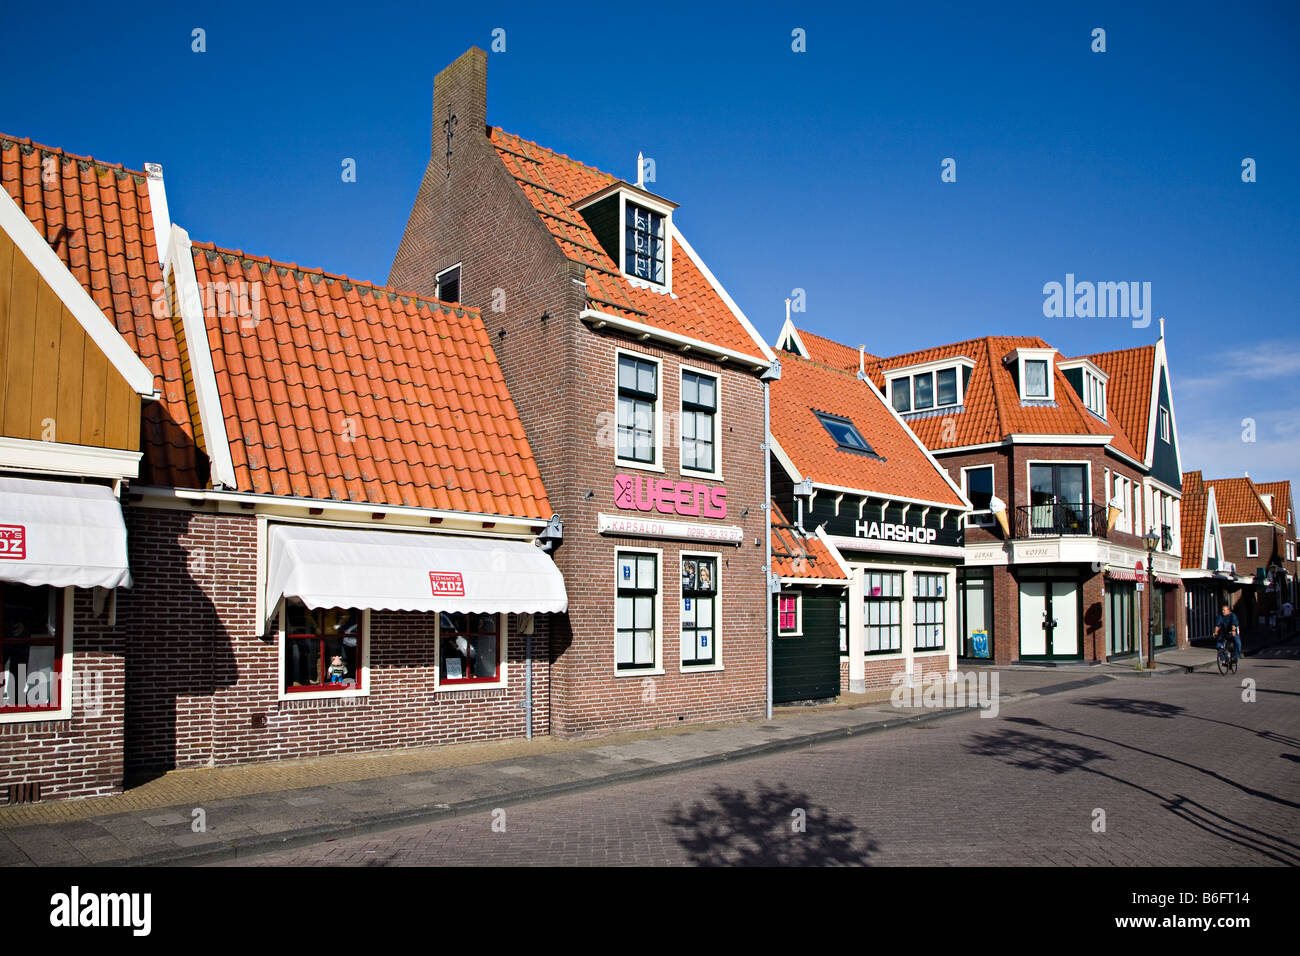 Modern built shops in traditional design with steep sloping roofs Volendam Netherlands Stock Photo